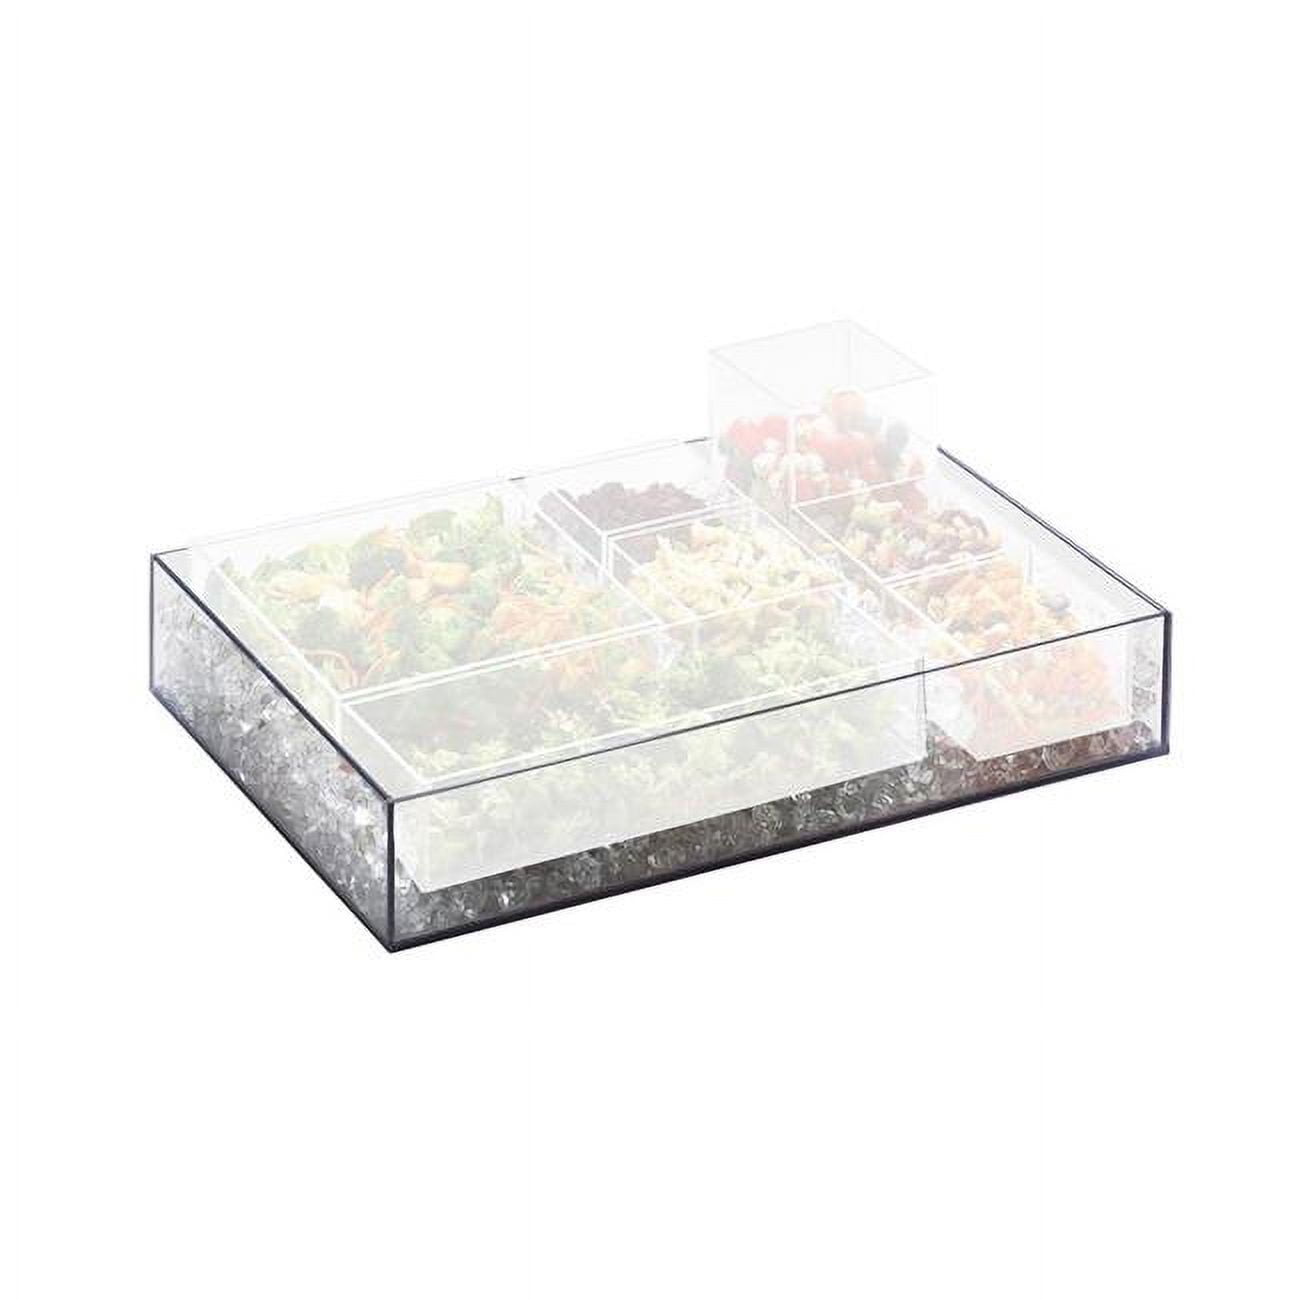 Picture of Cal Mil 1399-12 Cater Choice System Clear Ice Housing - 16 x 24 x 4.25 in.